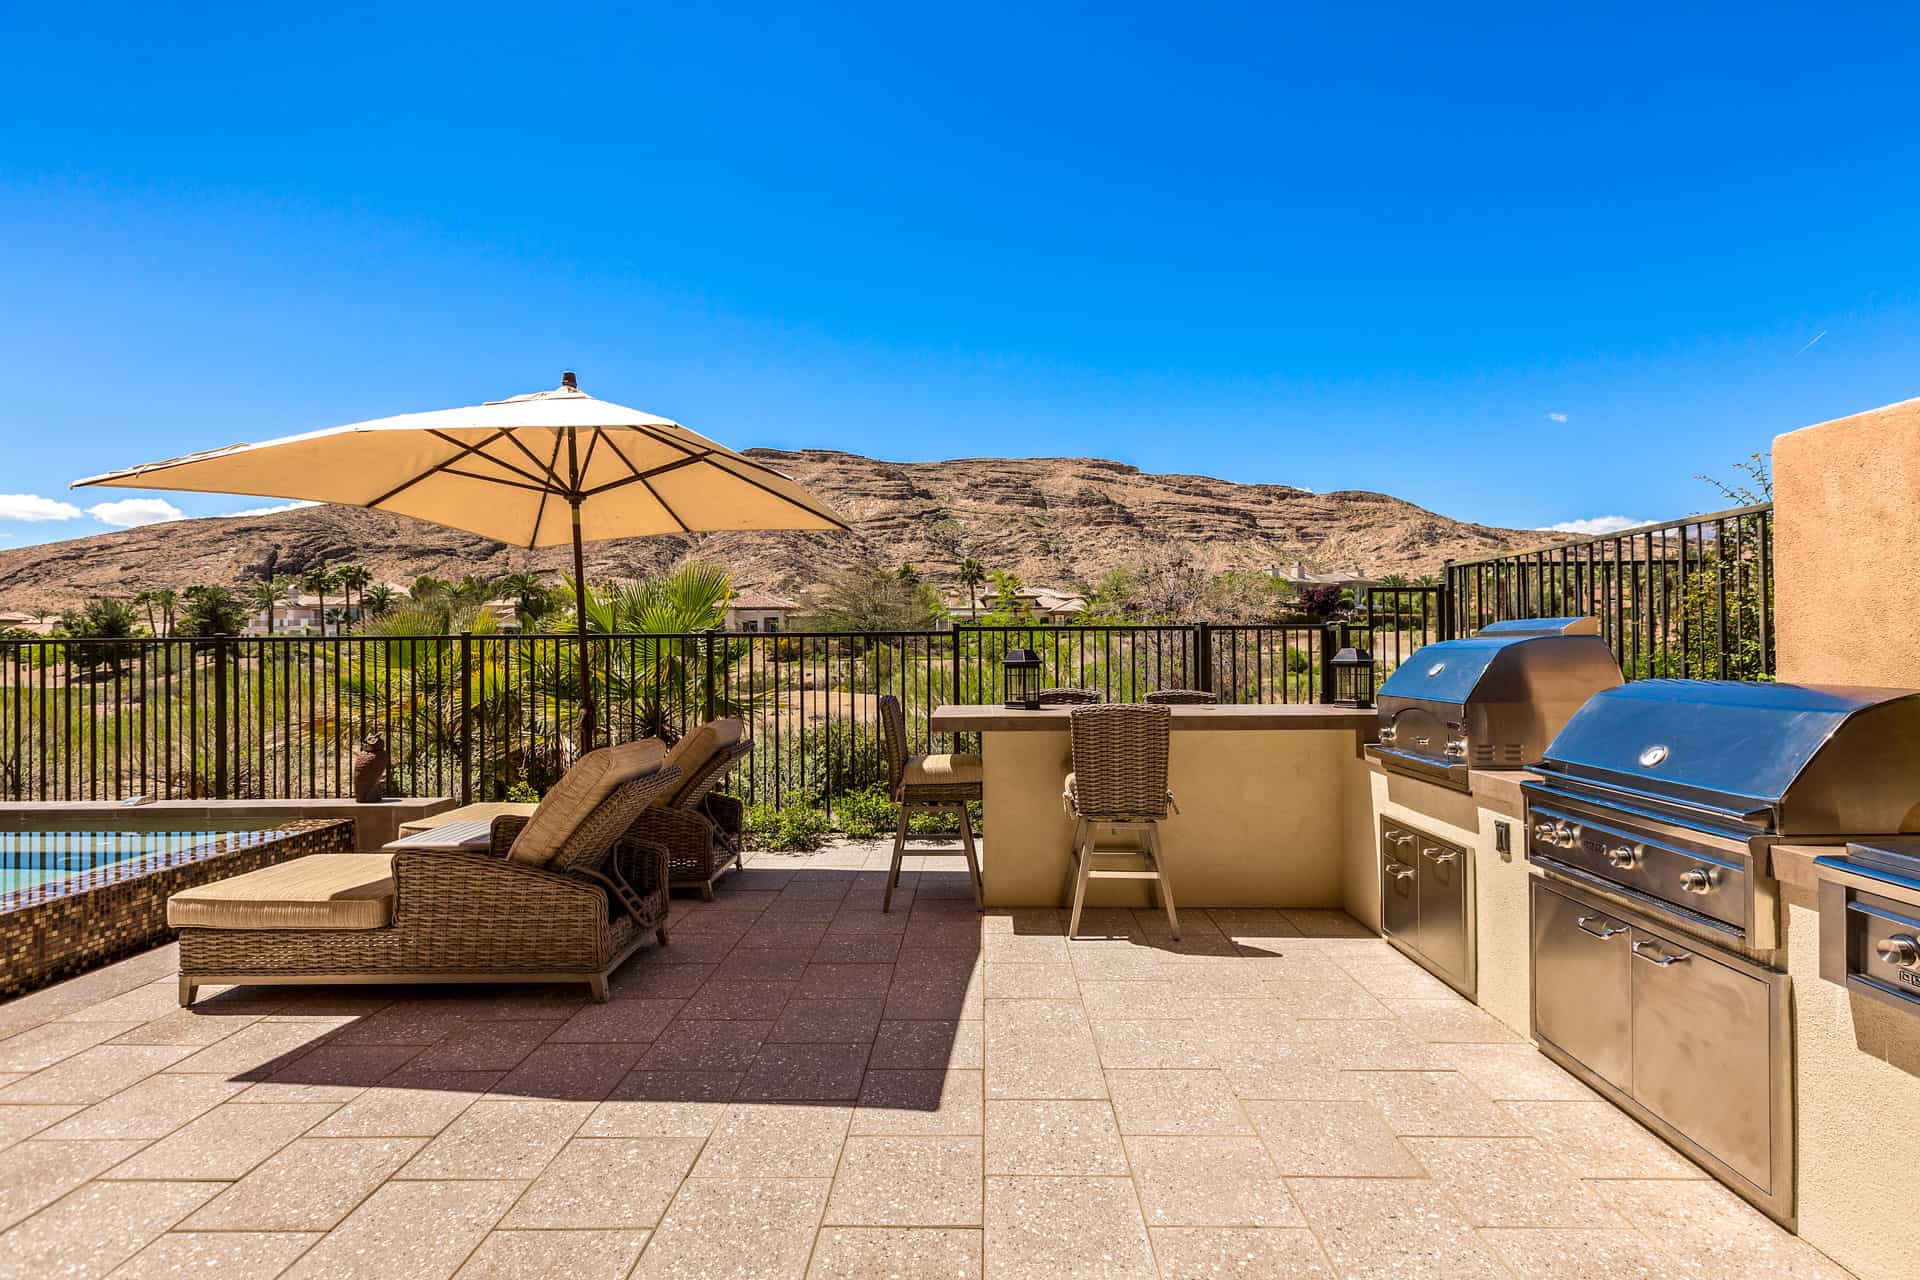 las-vegas-luxry-real-estate-realtor-rob-jensen-company-2615-grassy-spring-place-red-rock-country-club49